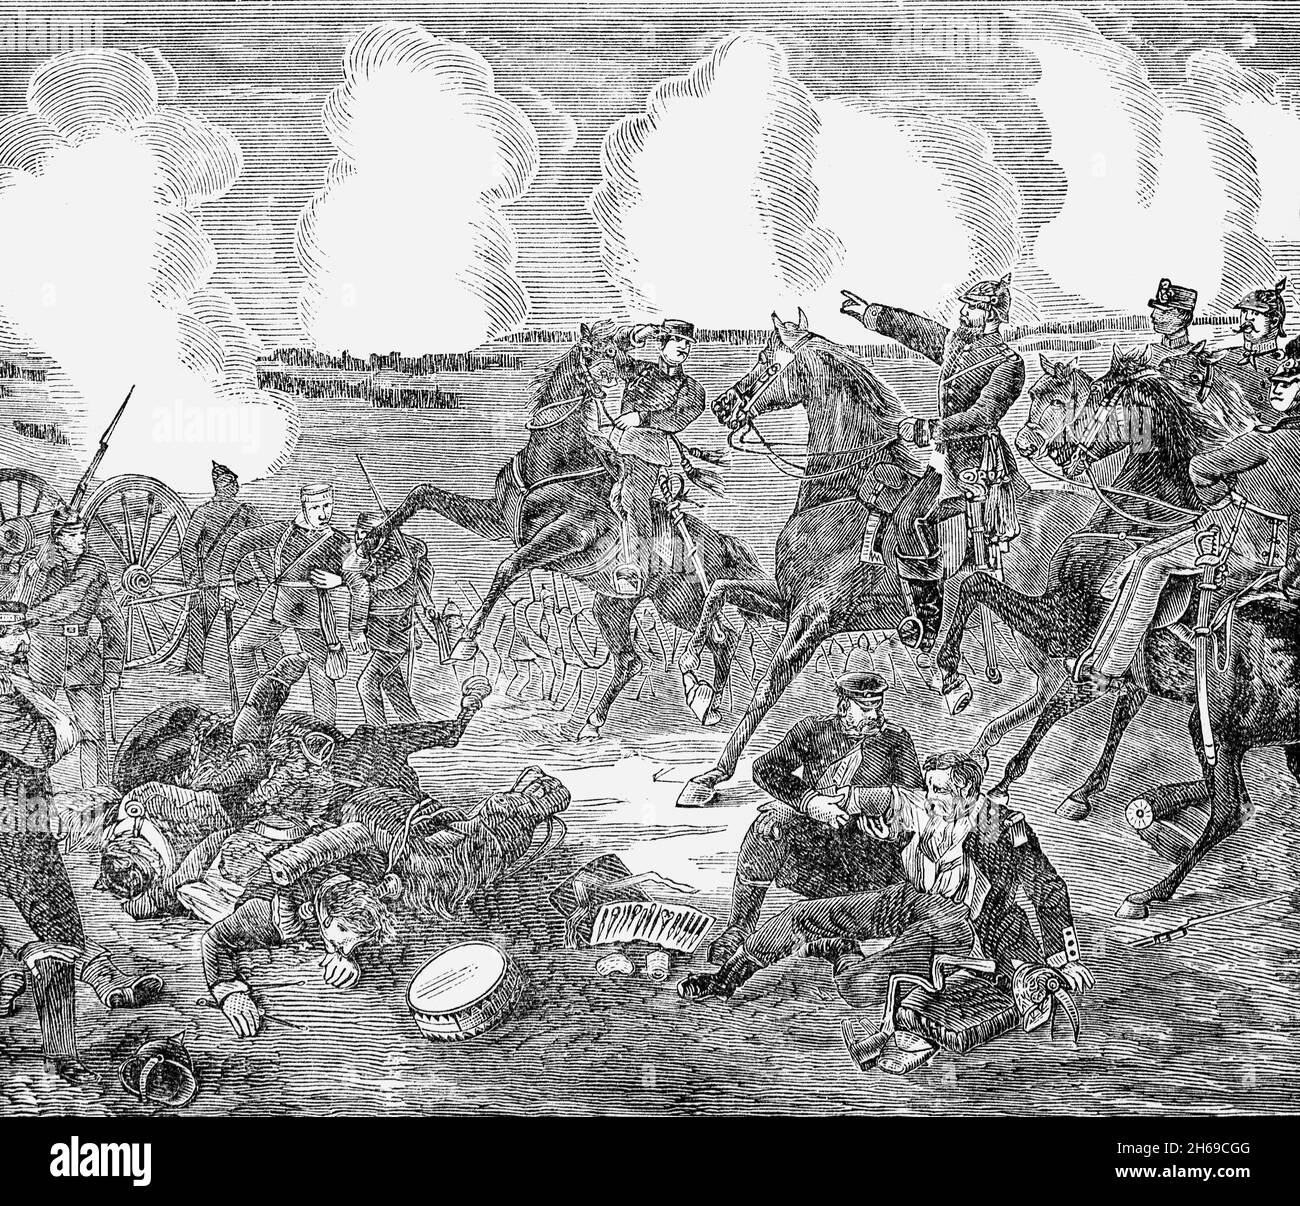 A late 19th Century illustration of the Battle of Gravelotte that took place on 18 August 1870, the largest battle of the Franco-Prussian War. Named after Gravelotte, a village in Lorraine, it was fought some 10 kilometres west of Metz and resulted in complete the destruction of French forces. Stock Photo